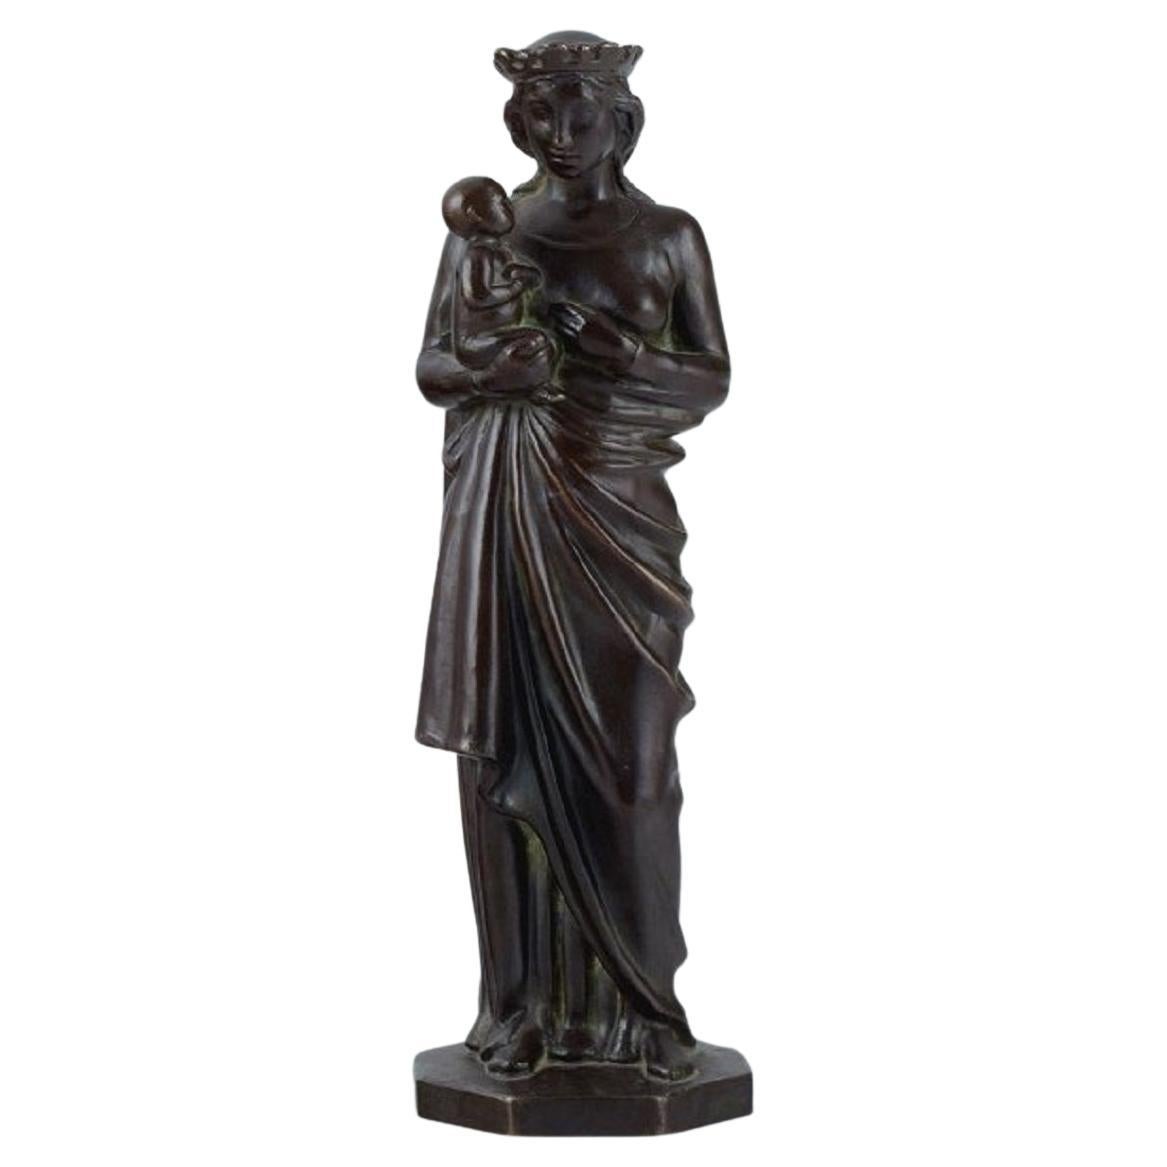 Johan G. C. Galster, Danish Sculptor, Bronze Figure of Virgin Mary and Child For Sale